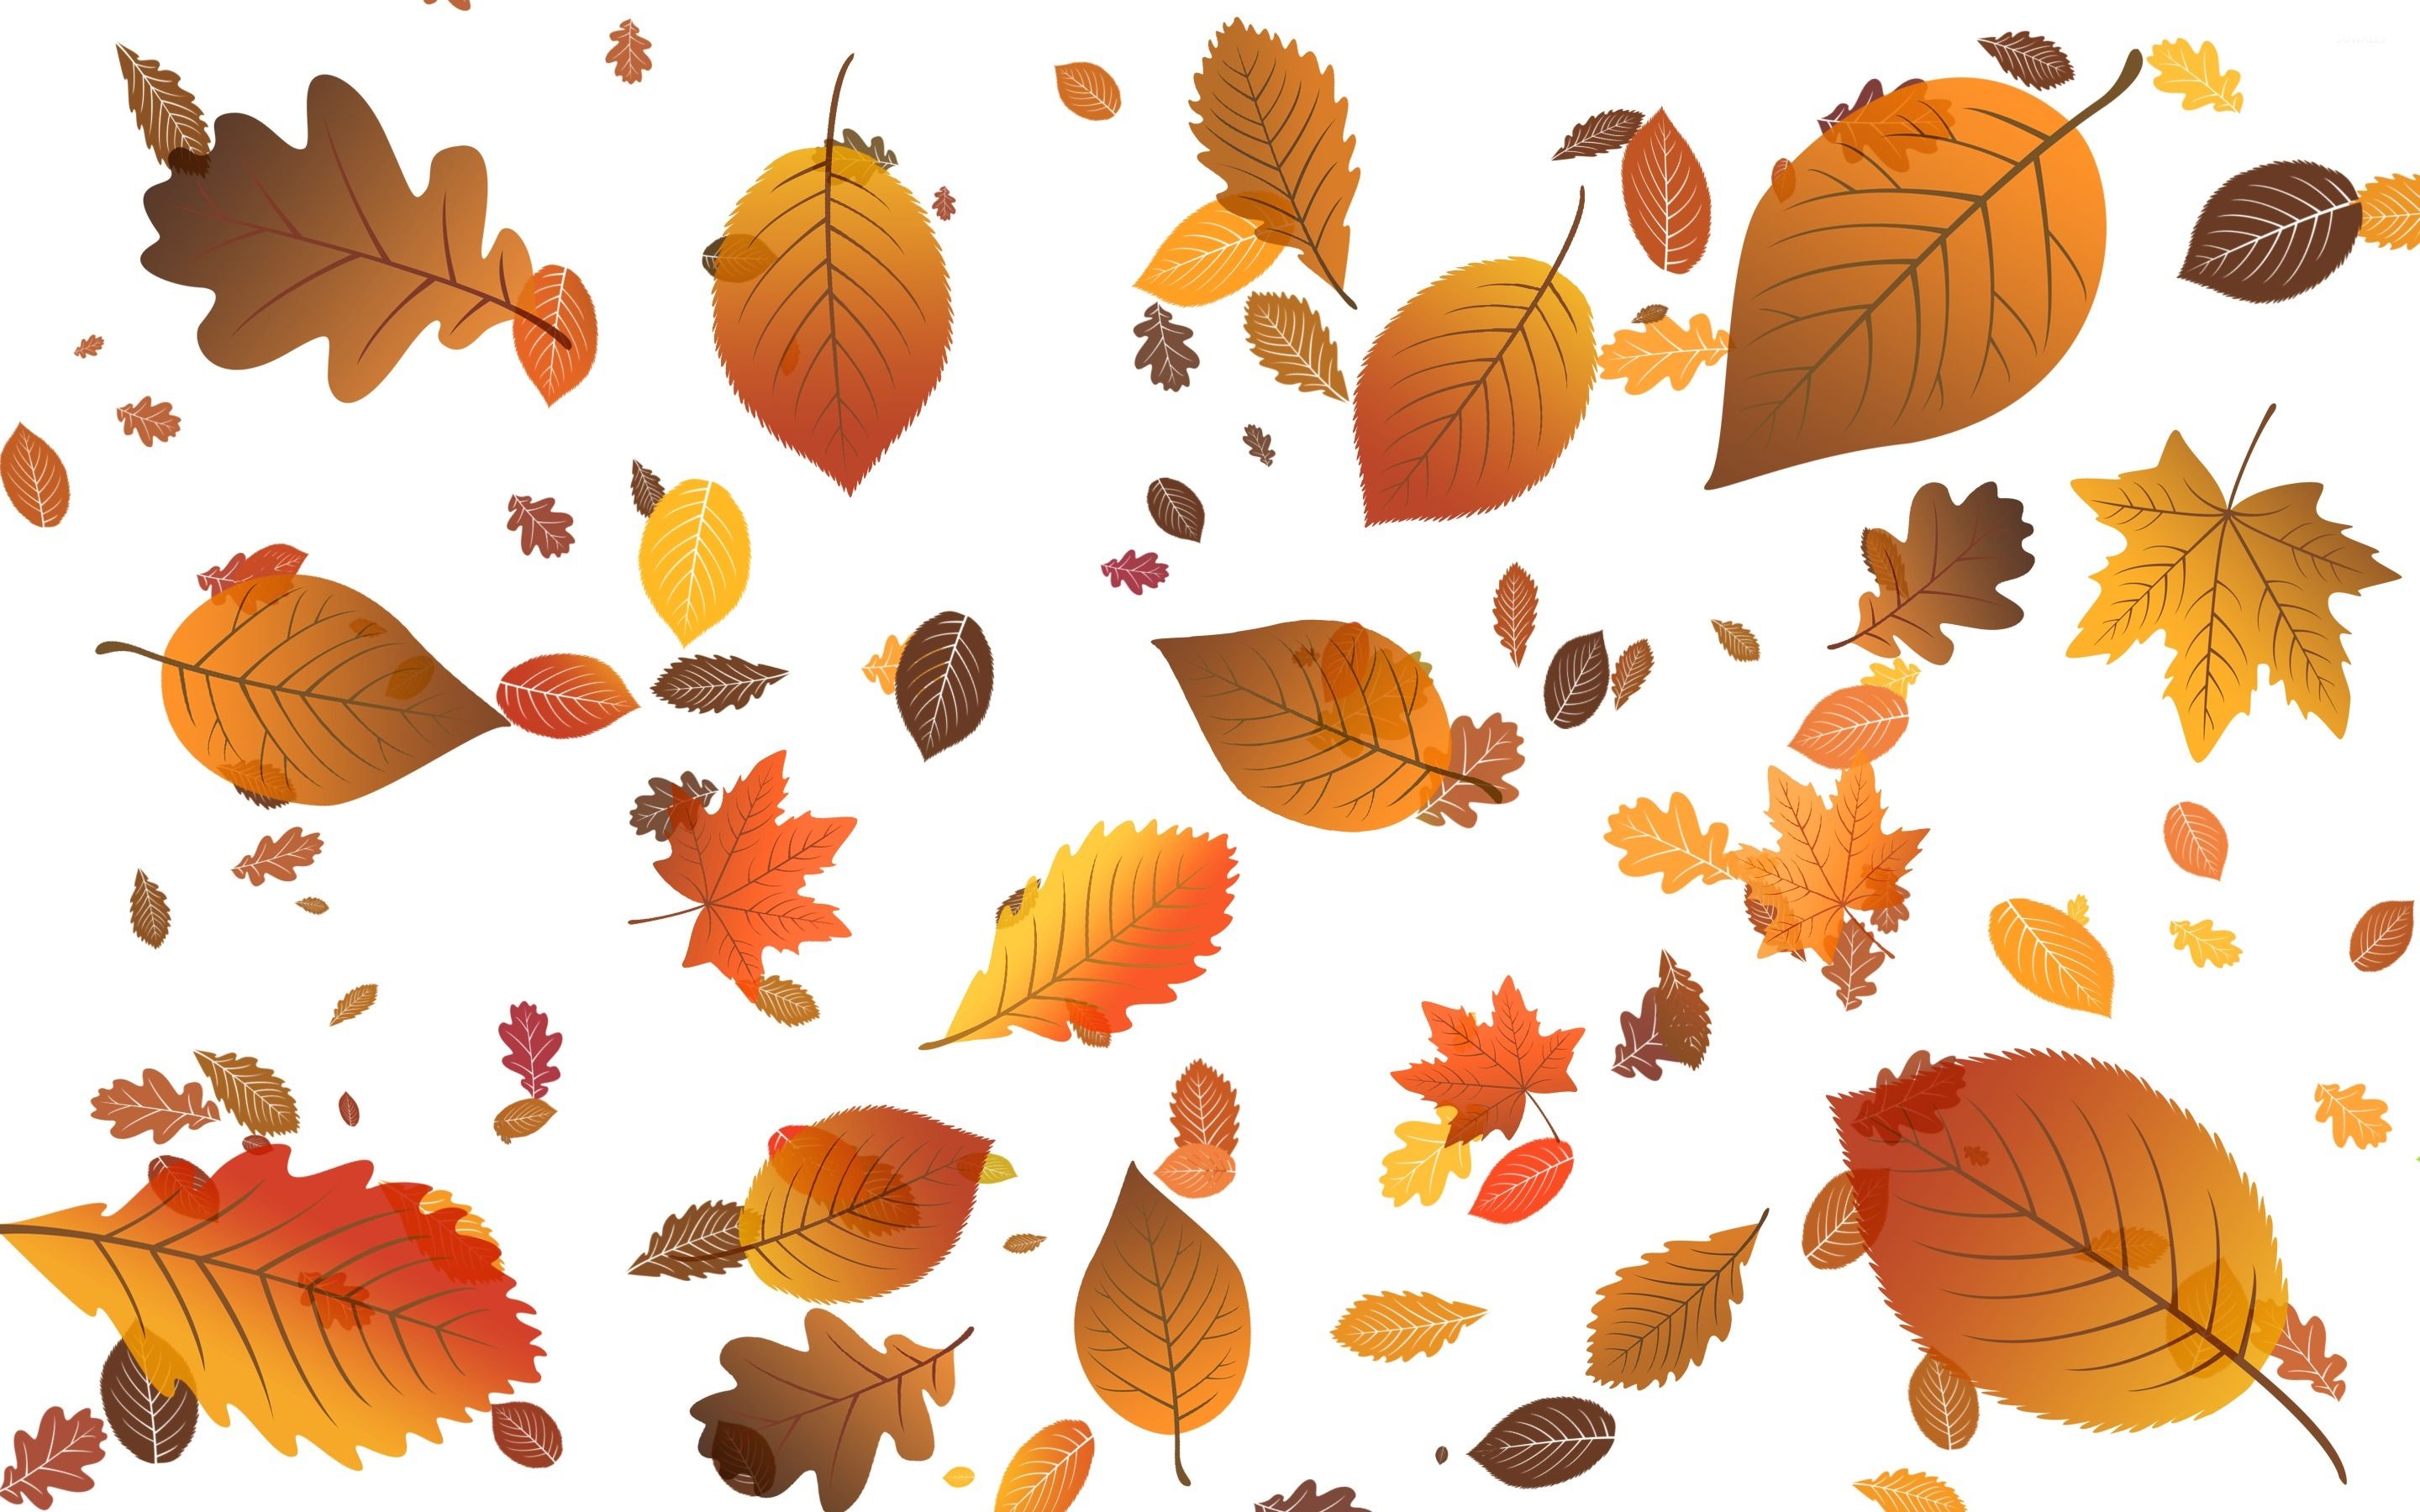 Autumn Leaves Cartoon Wallpapers - Wallpaper Cave